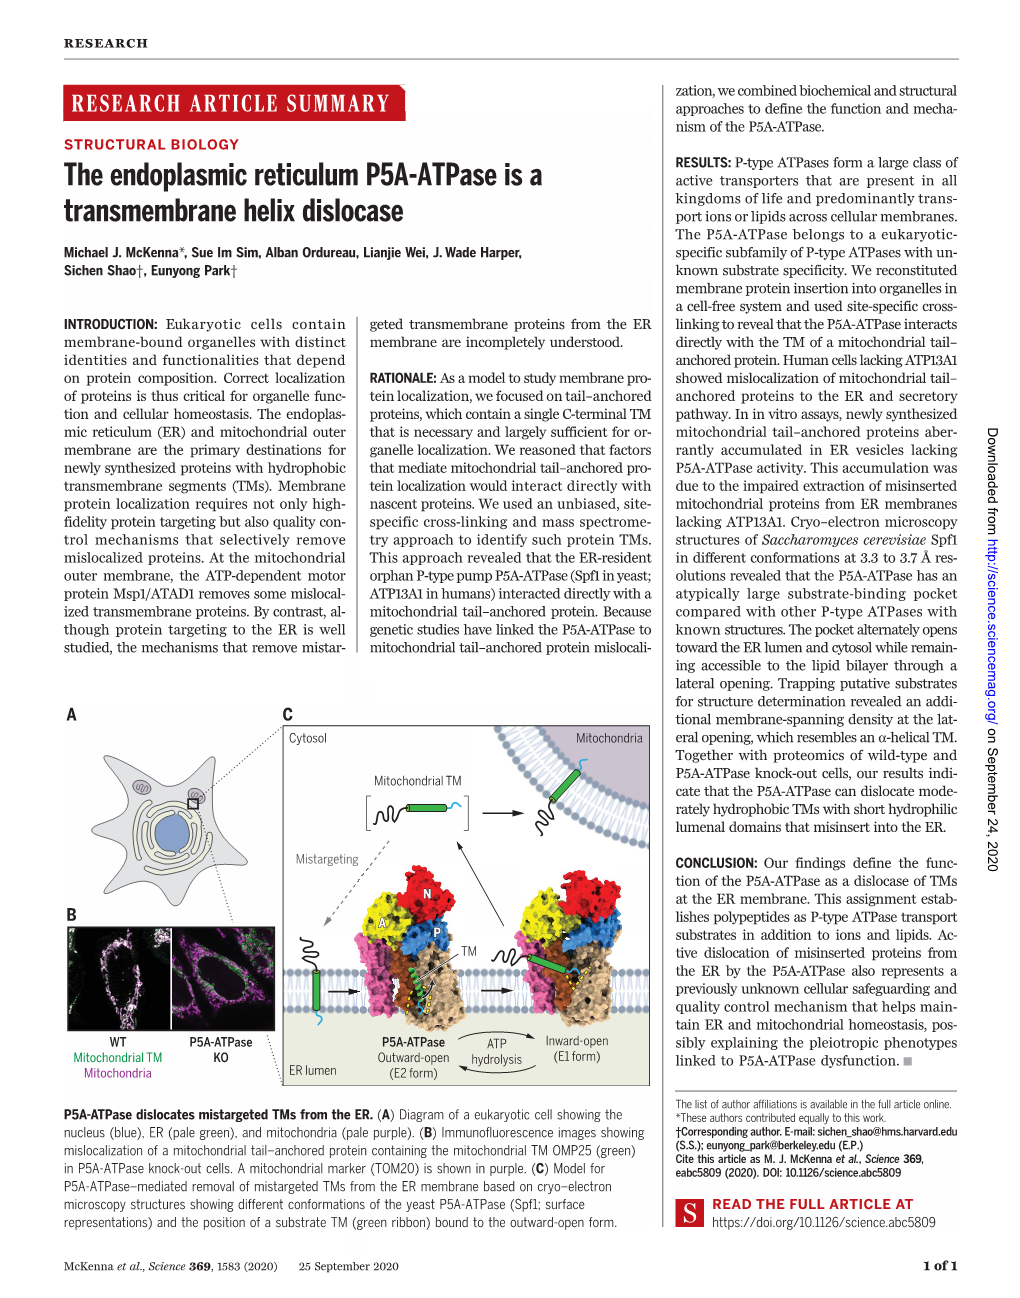 The Endoplasmic Reticulum P5A-Atpase Is a Transmembrane Helix Dislocase Michael J